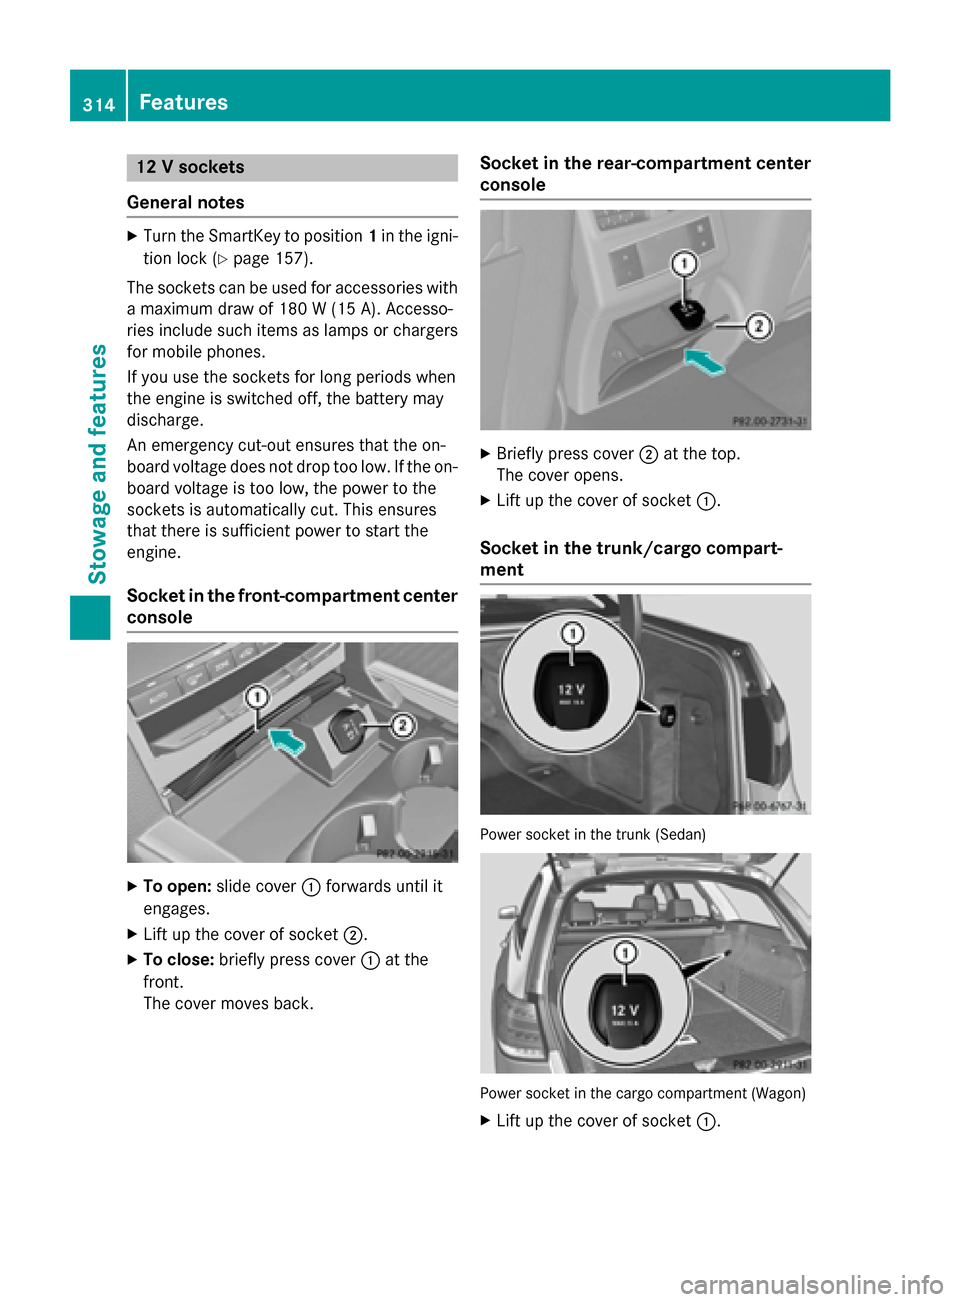 MERCEDES-BENZ E-Class SEDAN 2015 W212 Owners Guide 12 V sockets
General notes X
Turn the SmartKey to position 1in the igni-
tion lock (Y page 157).
The sockets can be used for accessories with a maximum draw of 180 W (15 A). Accesso-
ries include such